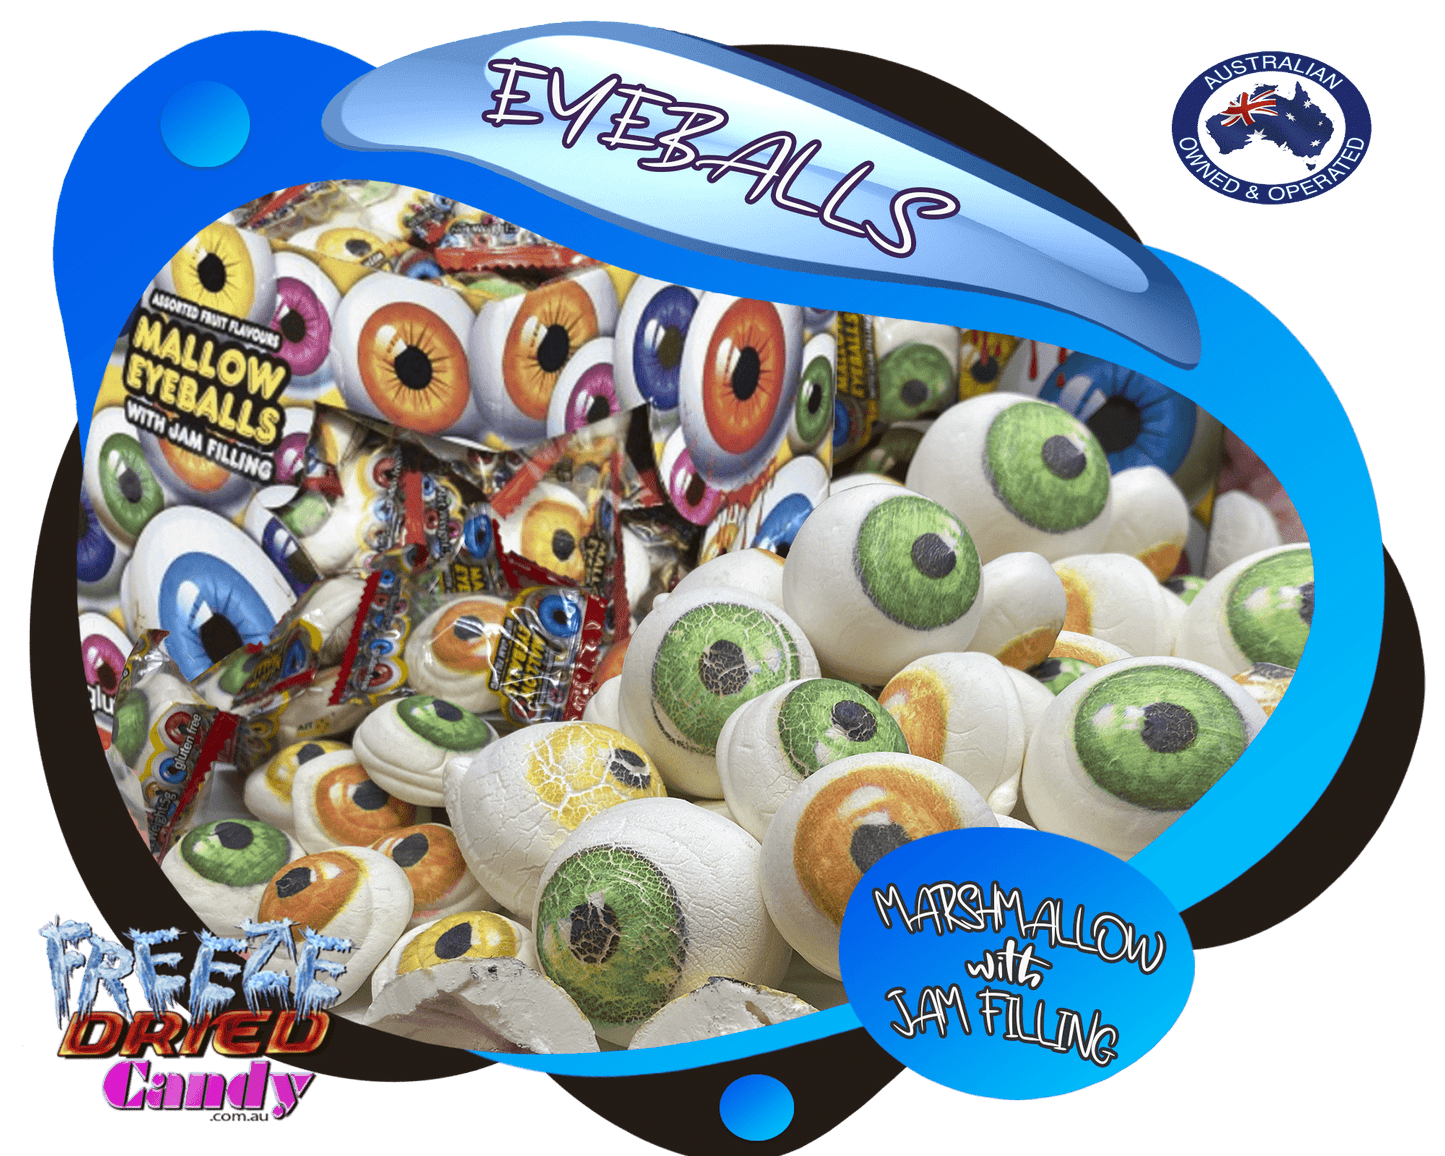  Freeze Dried Eyeballs - Marshmallow with Jam Filling - Freeze Dried Candy Lollies & Treats Try Marshmallow in a whole new fun way!!  Mallow Eyeballs all puffed up, no longer squishy, now transformed into yummy, lighter than air, irresistibly crunchy, melt in your mouth treat,  that is super addictive !   